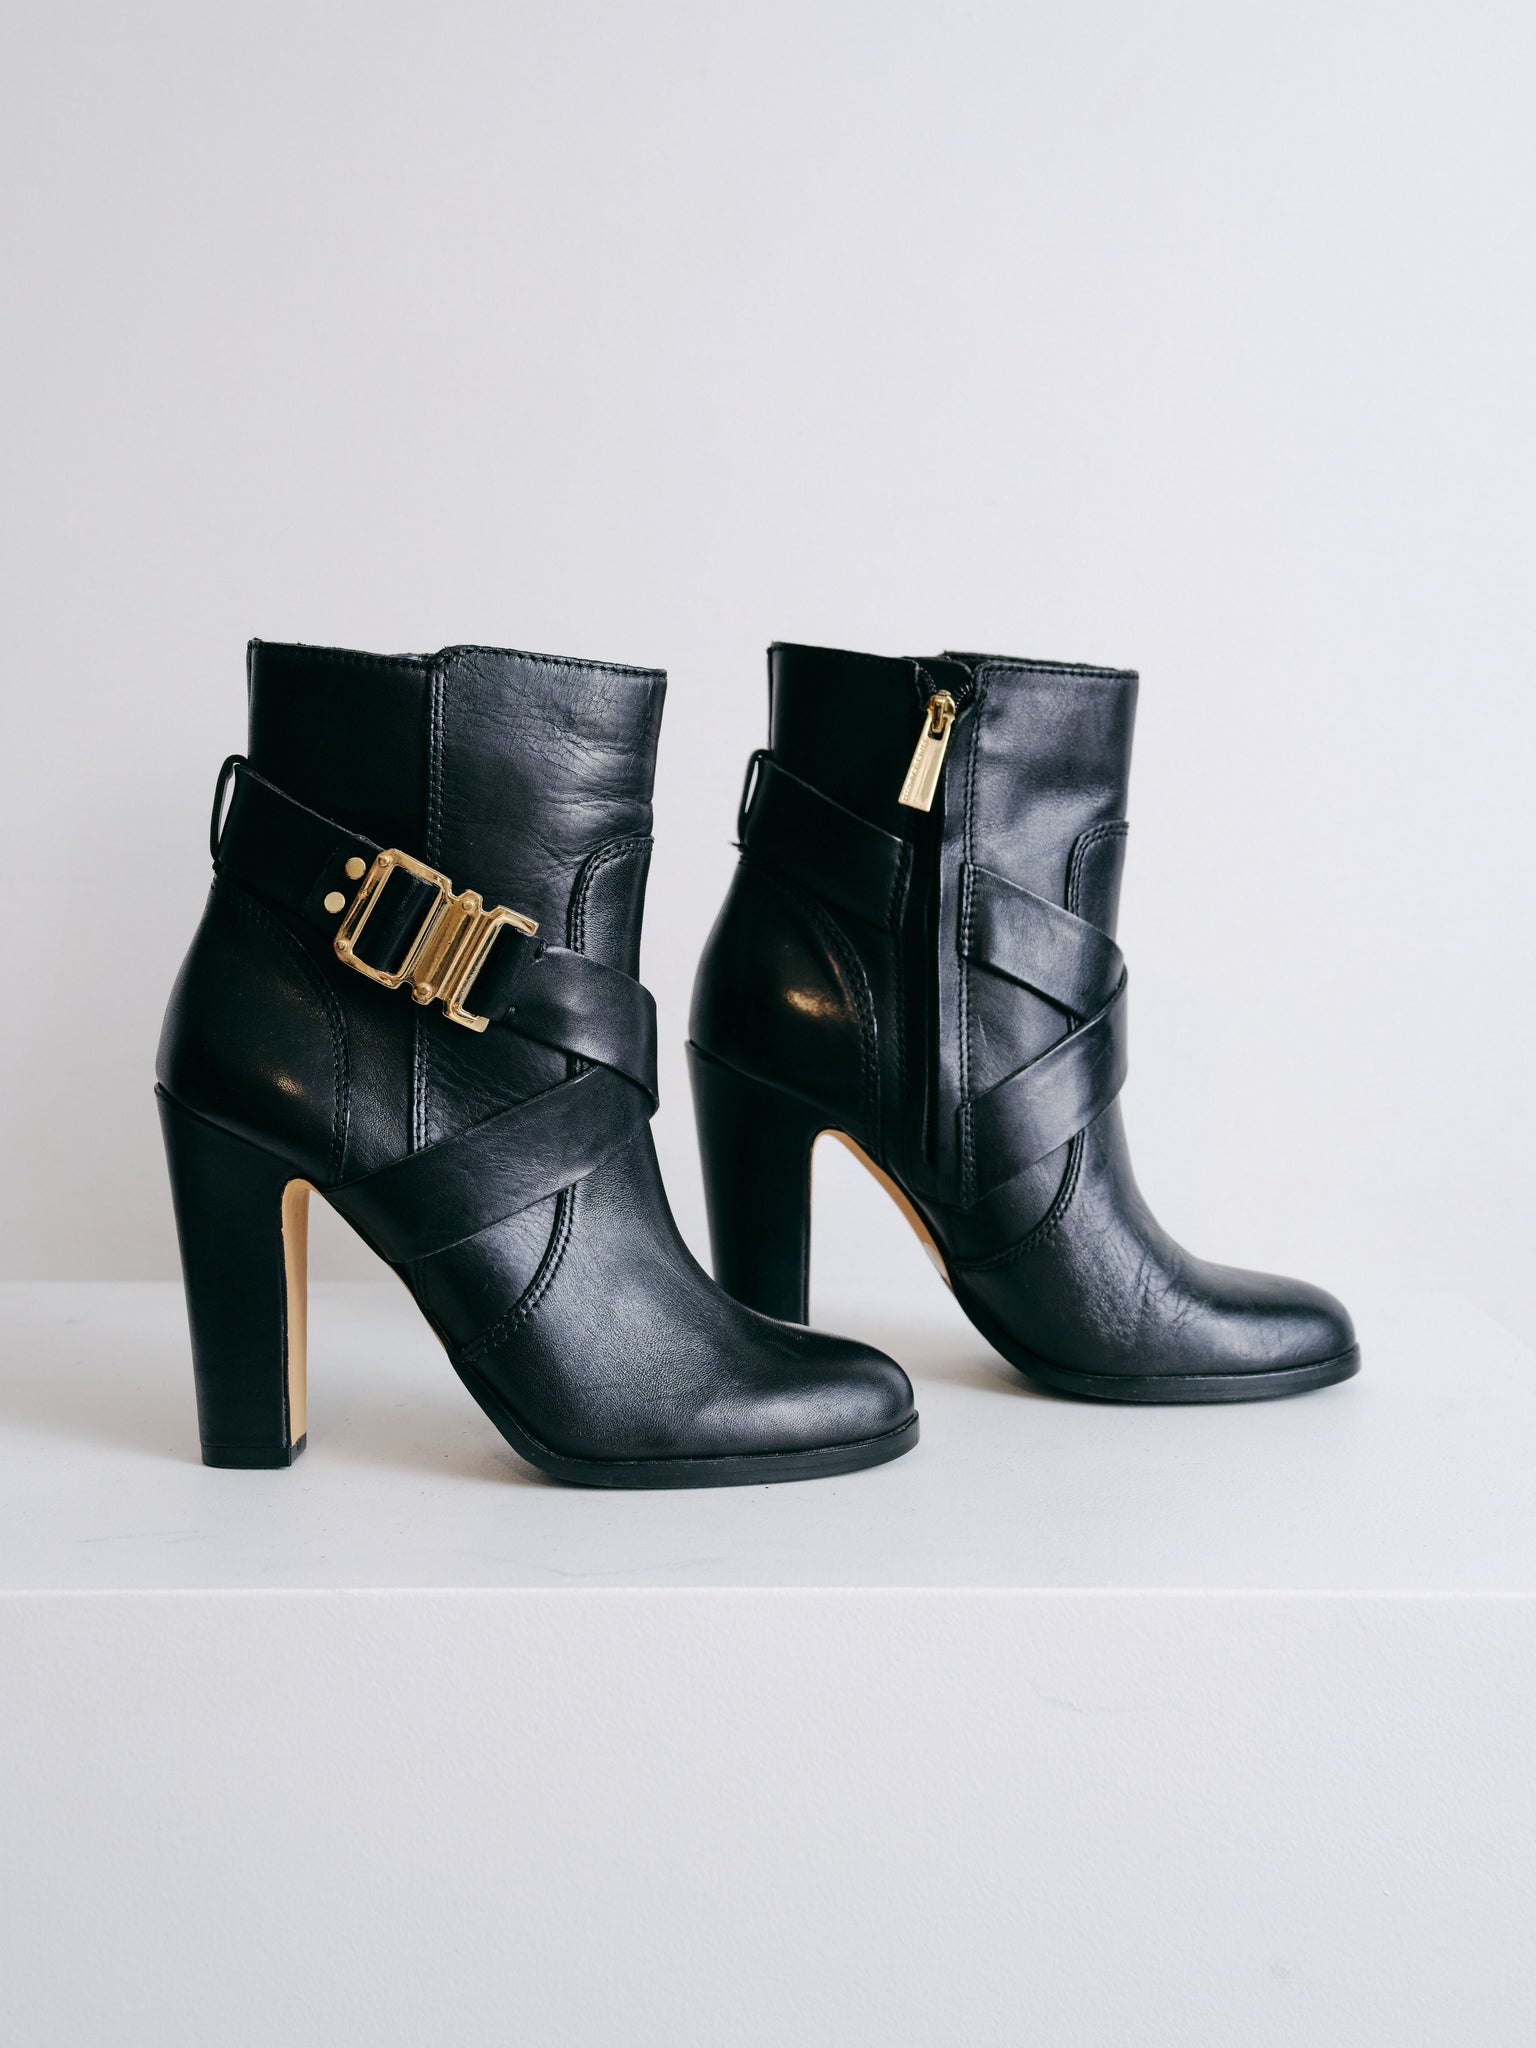 Vince Camuto Black Leather "Connolly" Booties